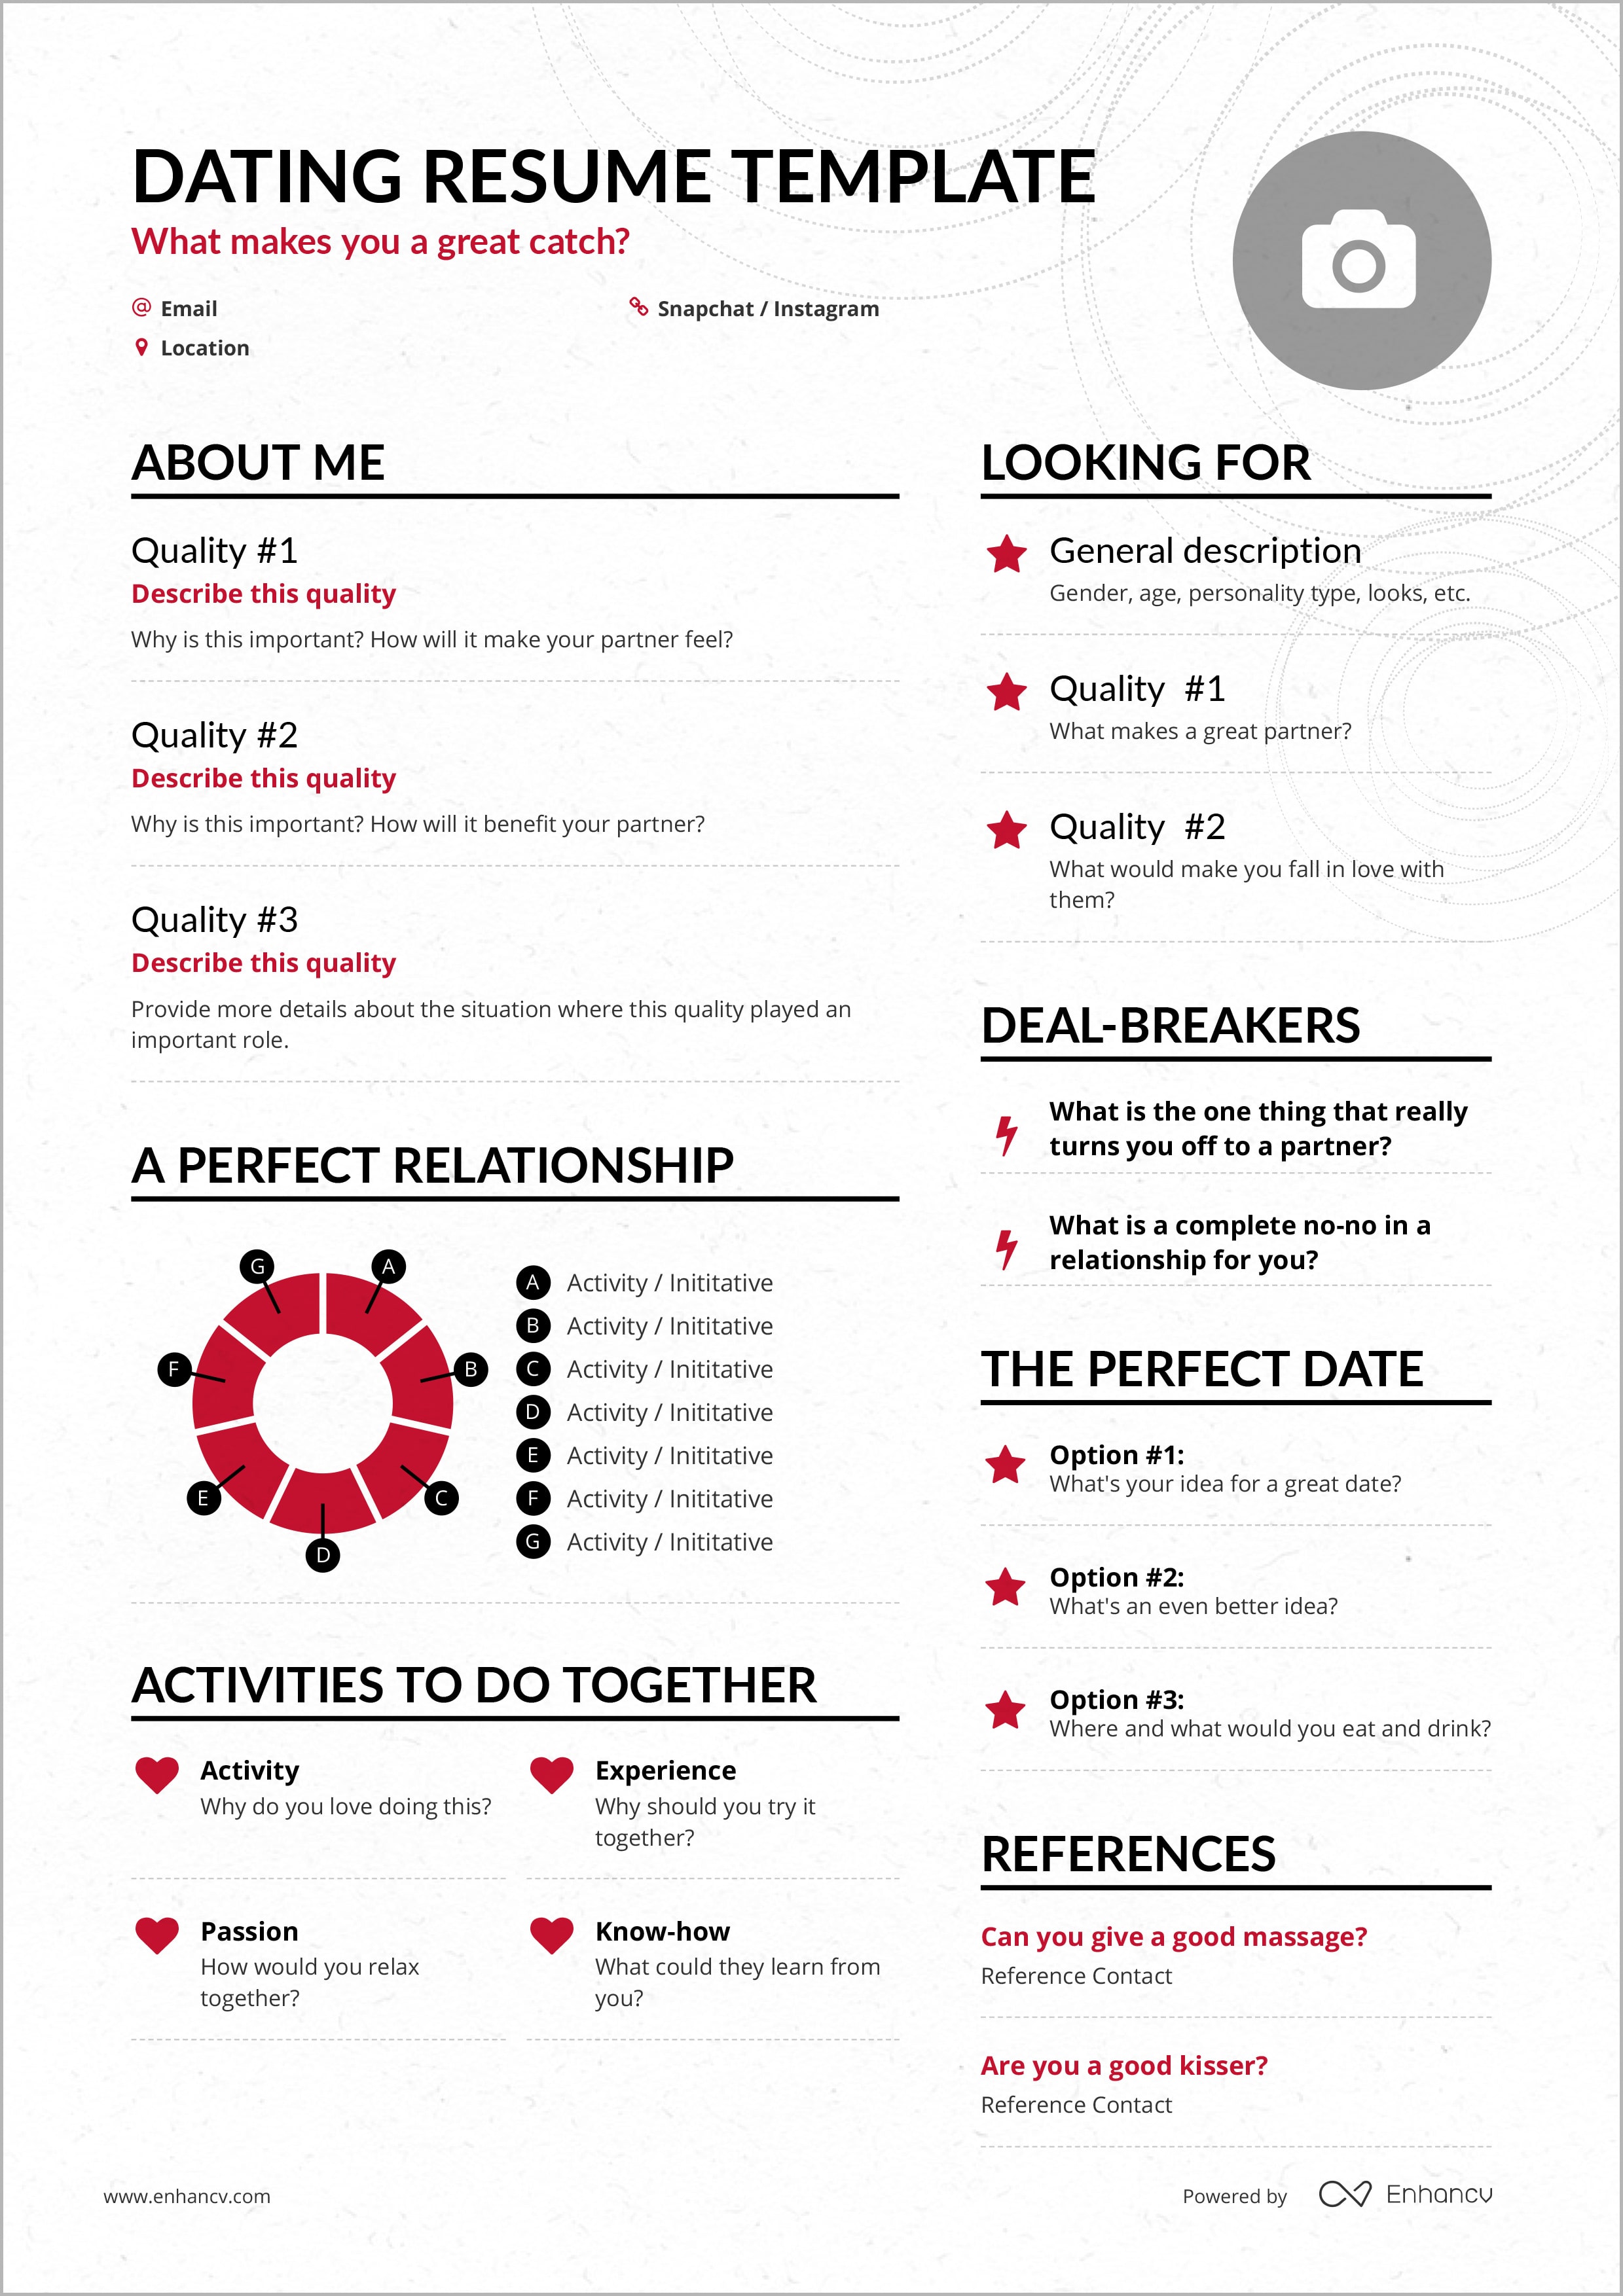 Enhancv Sick of dating apps? See how the dating resume might change the game 